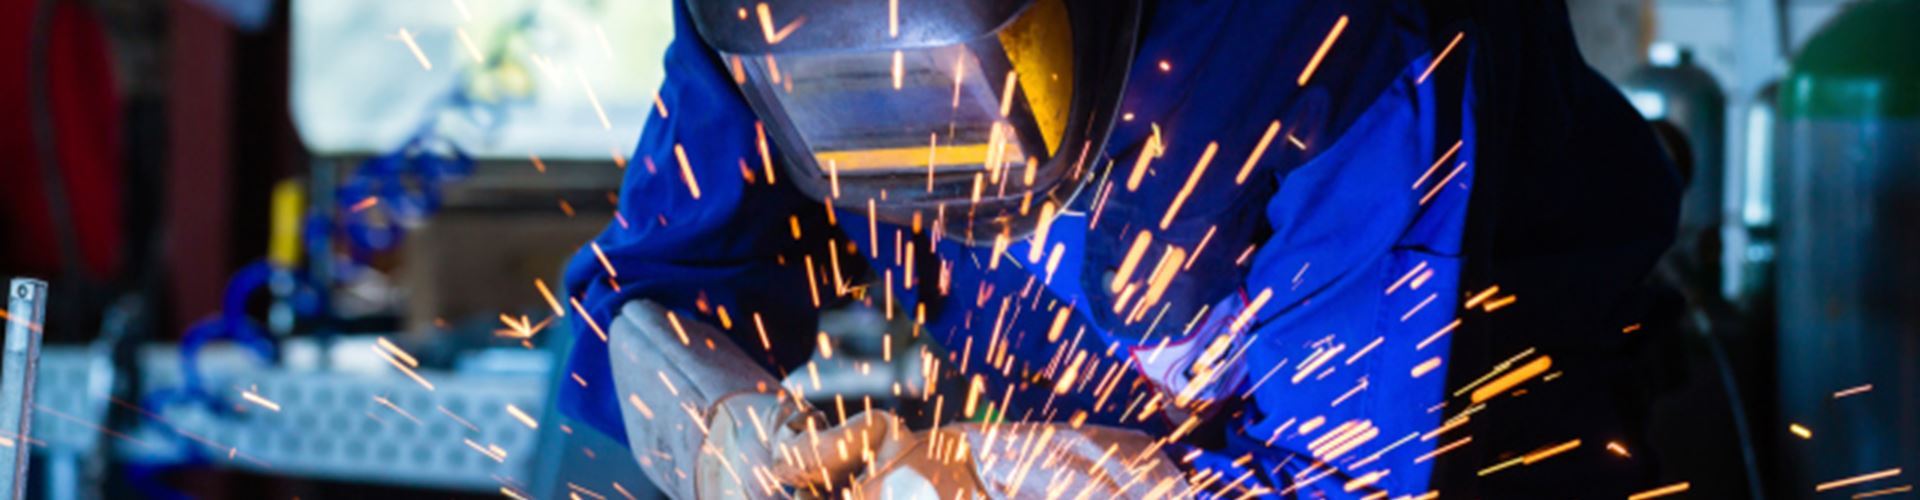 Robust UK manufacturing data highlights strong start to 2015